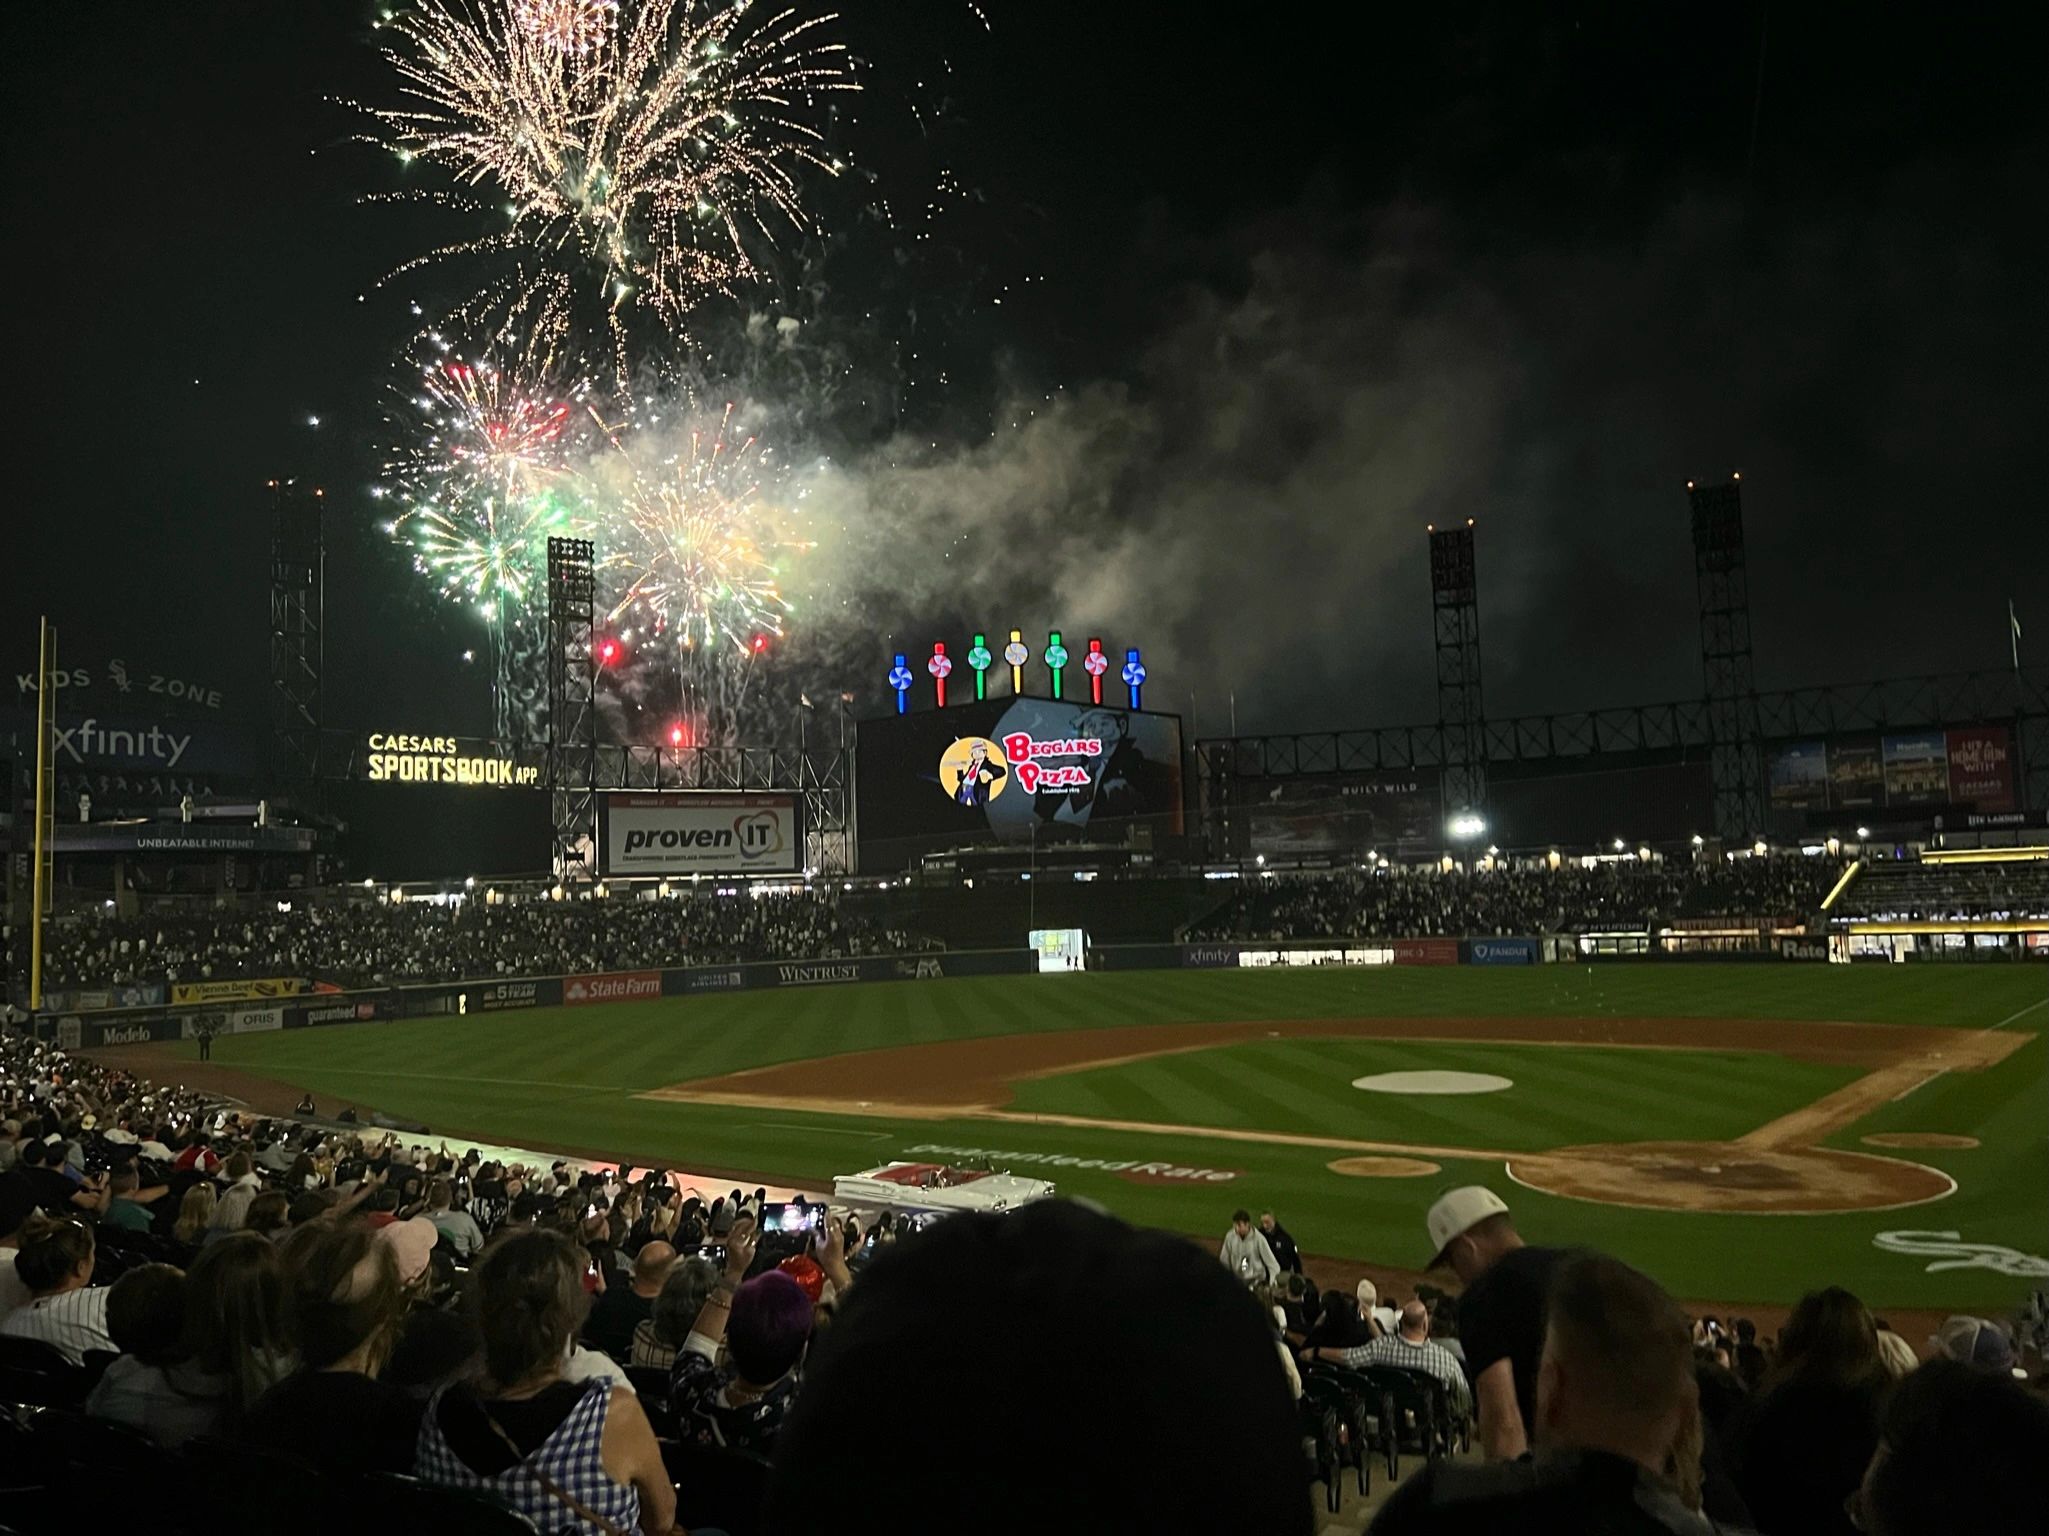 Scenics at Guaranteed Rate Field - Inside the White Sox